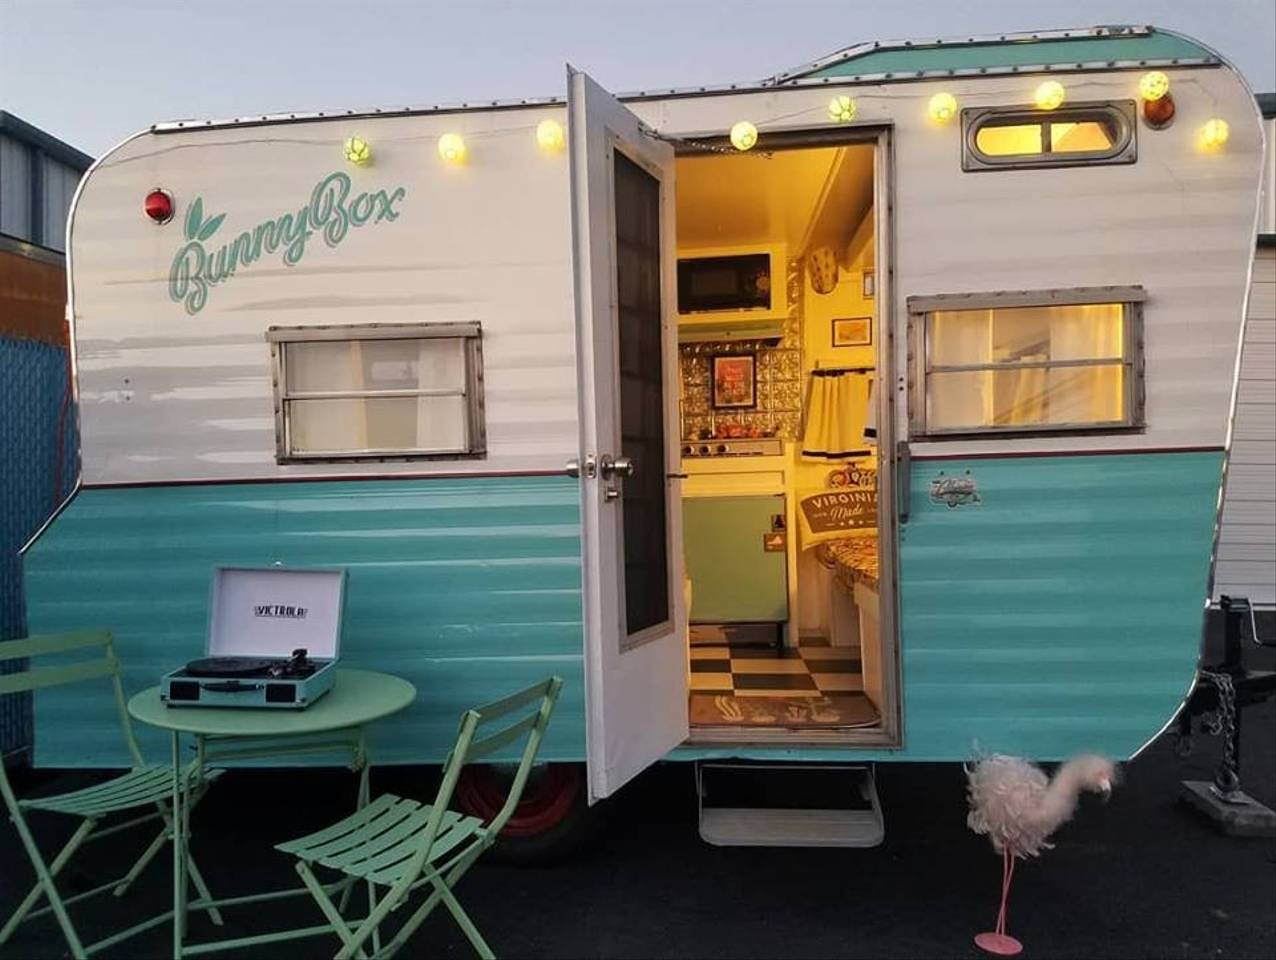 Airbnb experience the Bunny Box can be towed to any camping location of your choosing in the Virginia Beach area